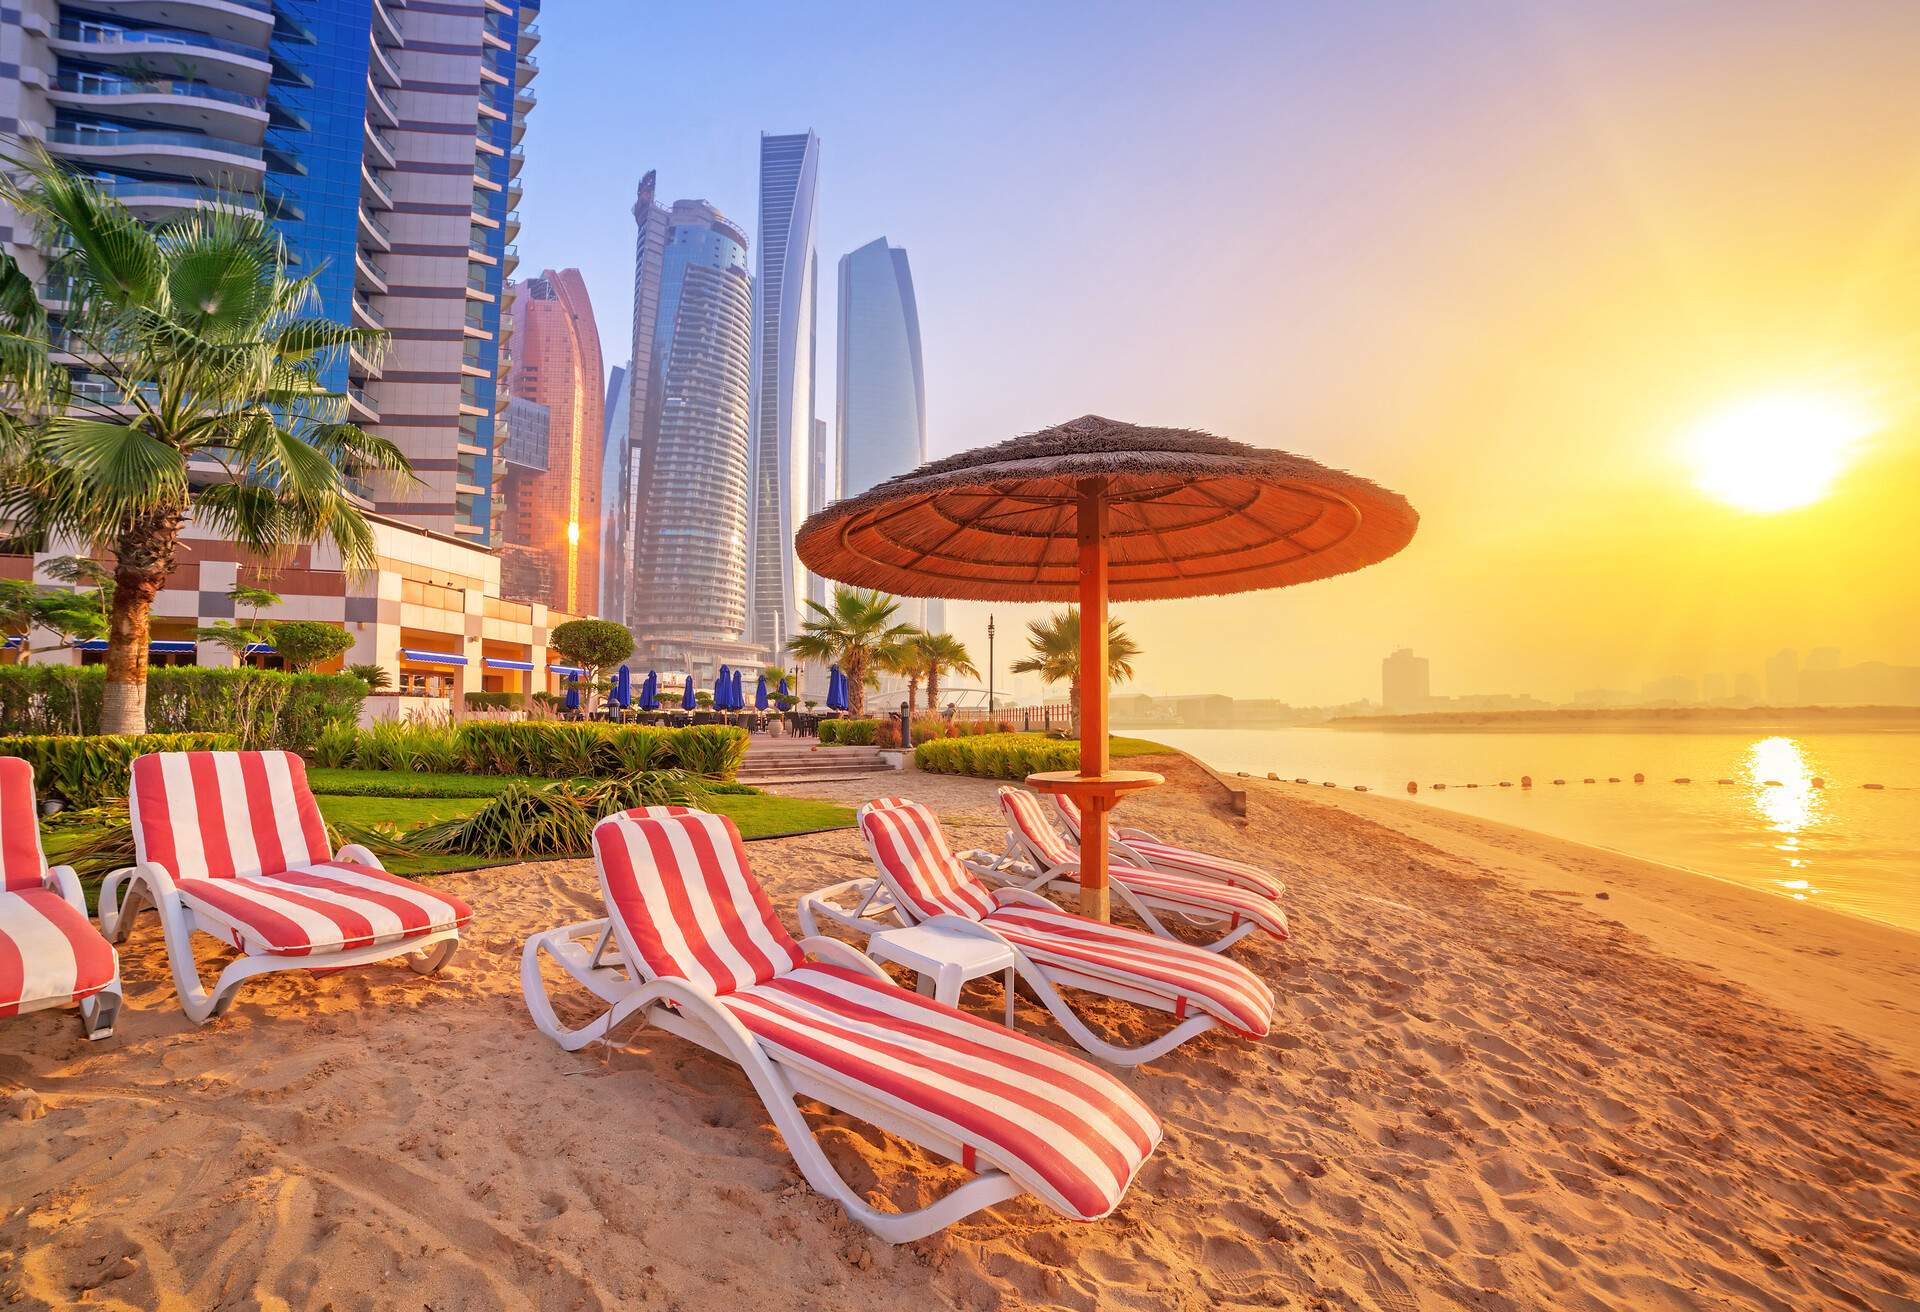 At sunrise, several red-white striped sunbeds under a hut umbrella on a fine sand beach surrounded by tall buildings.